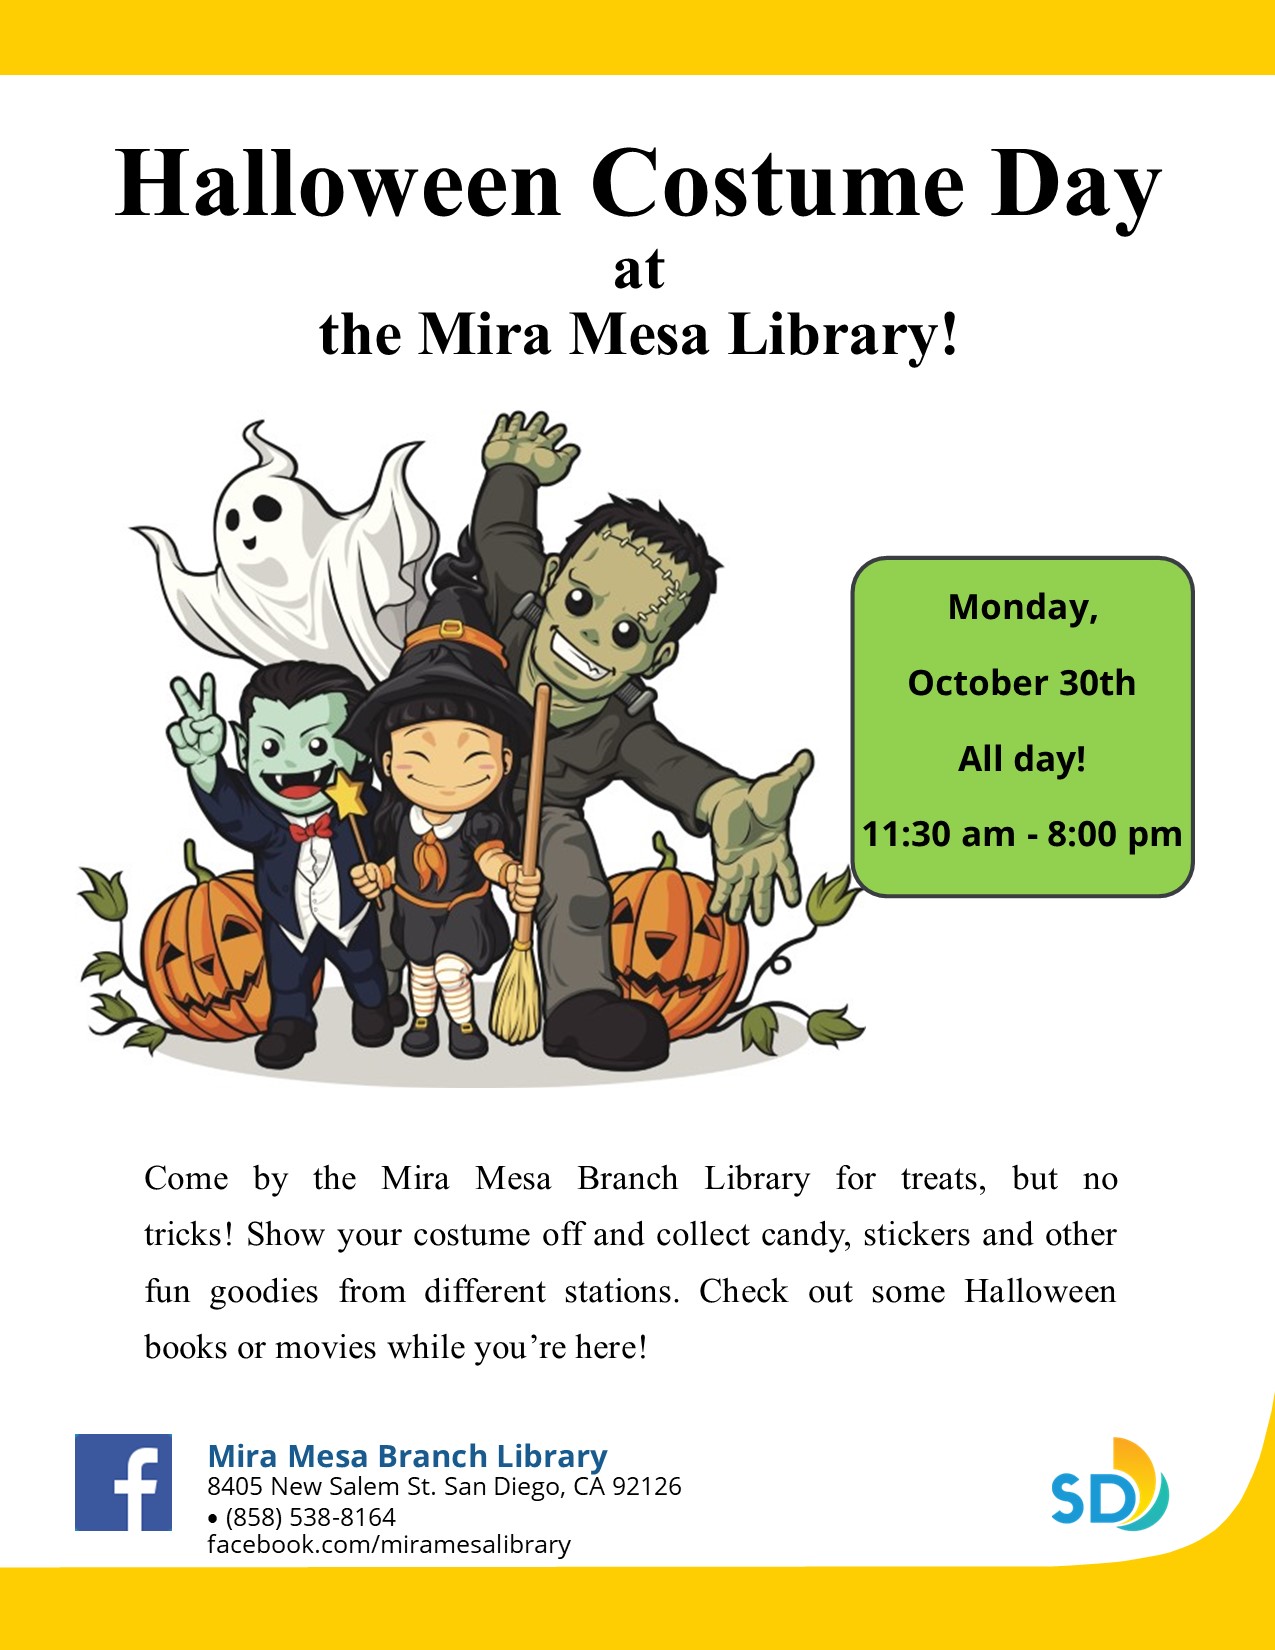 Illustration of children dressed in Halloween costumes on flyer promoting information about the program.